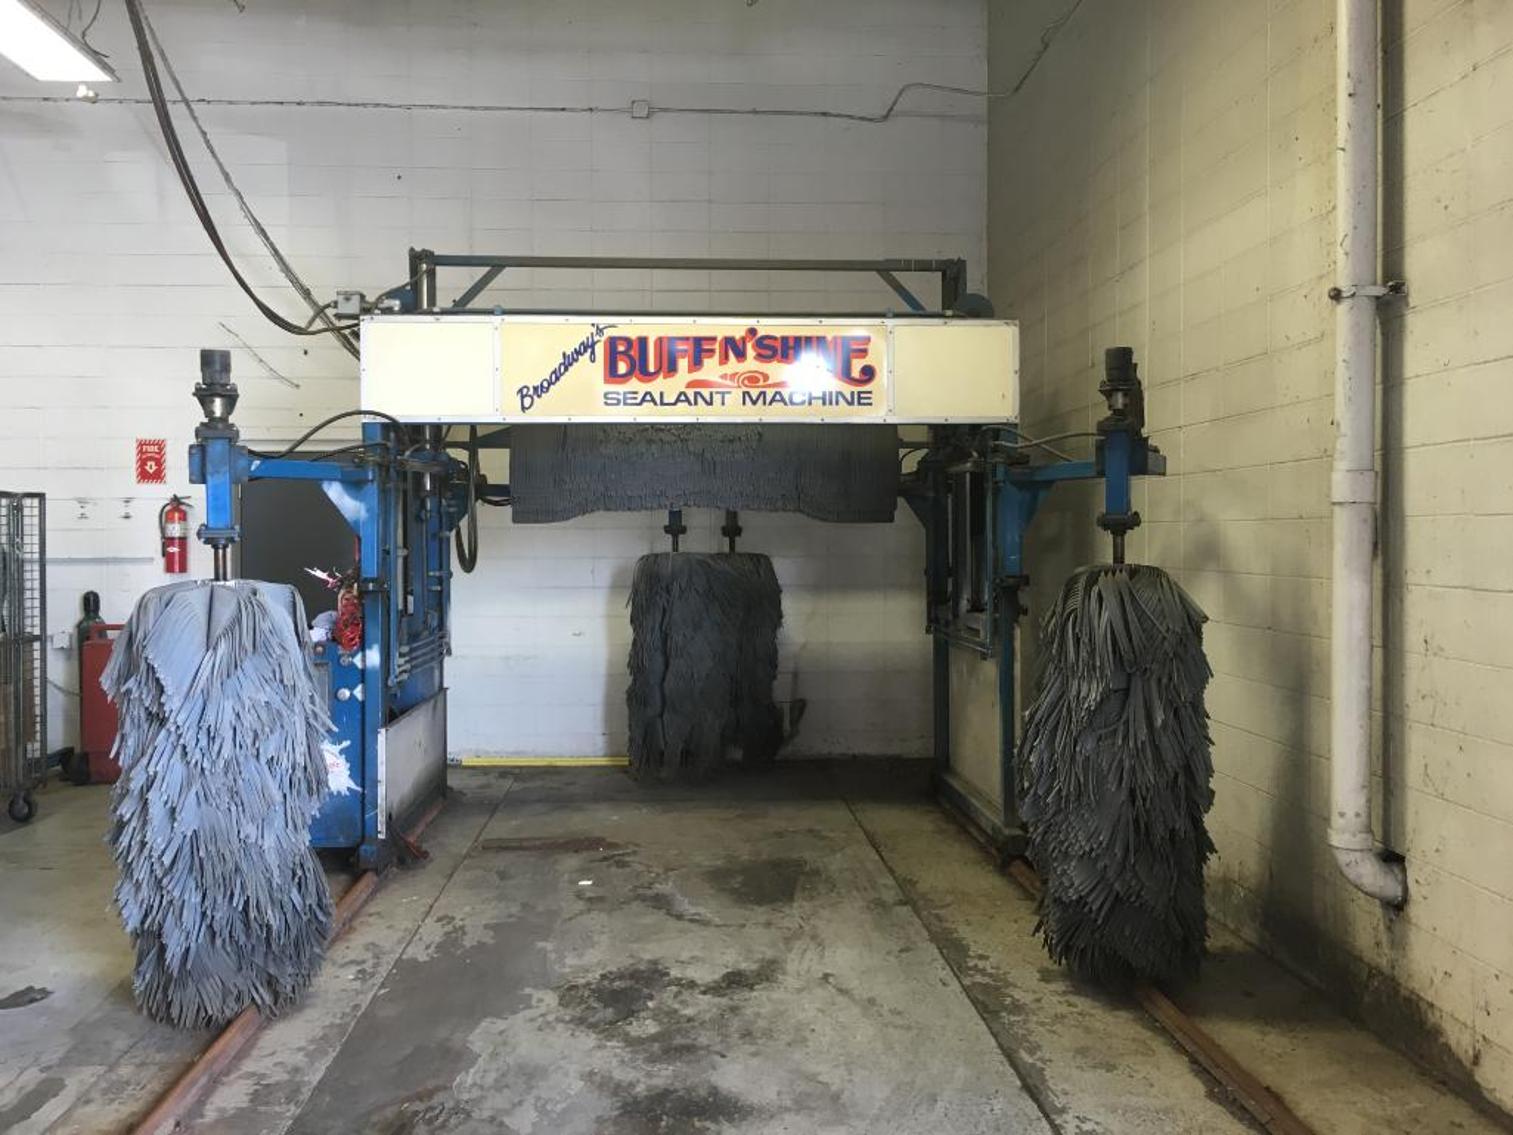 Excess Shop & Parts Room Equipment Due to Store Remodeling: (33) Car Hoists, Mezzanine, & Office Furniture